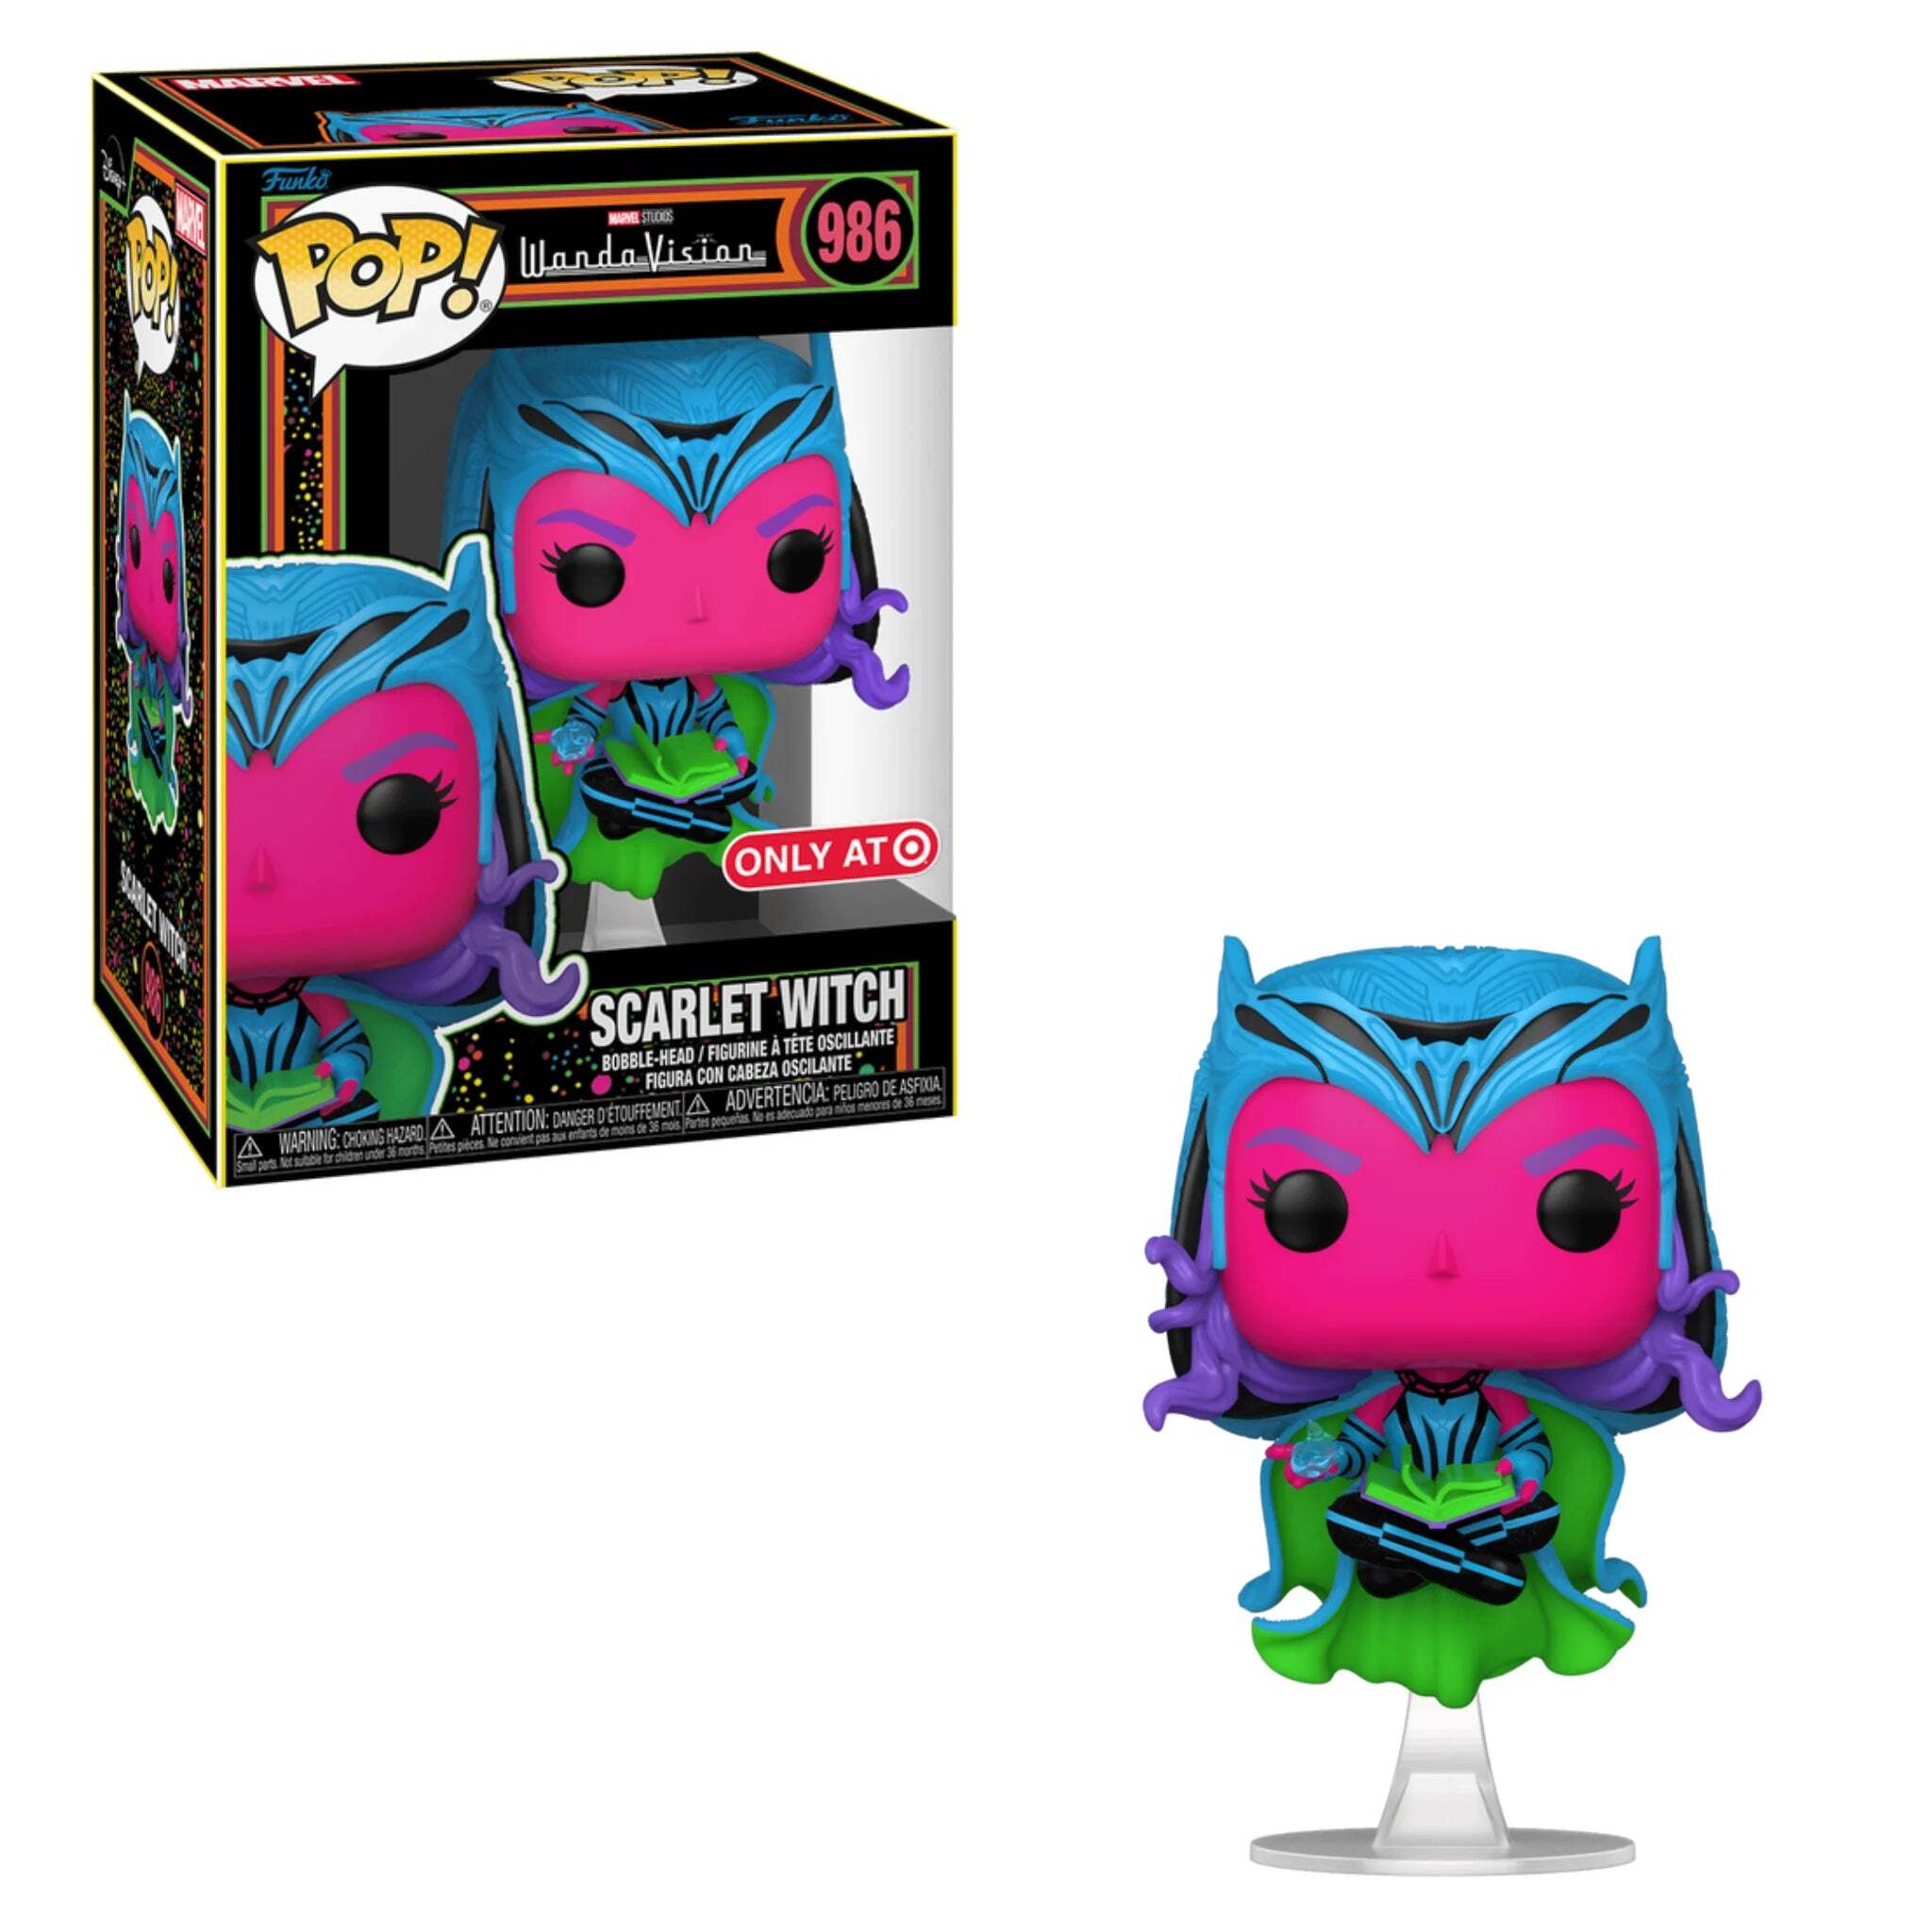 Scarlet Witch (Blacklight) Funko Pop! TARGET EXCLUSIVE